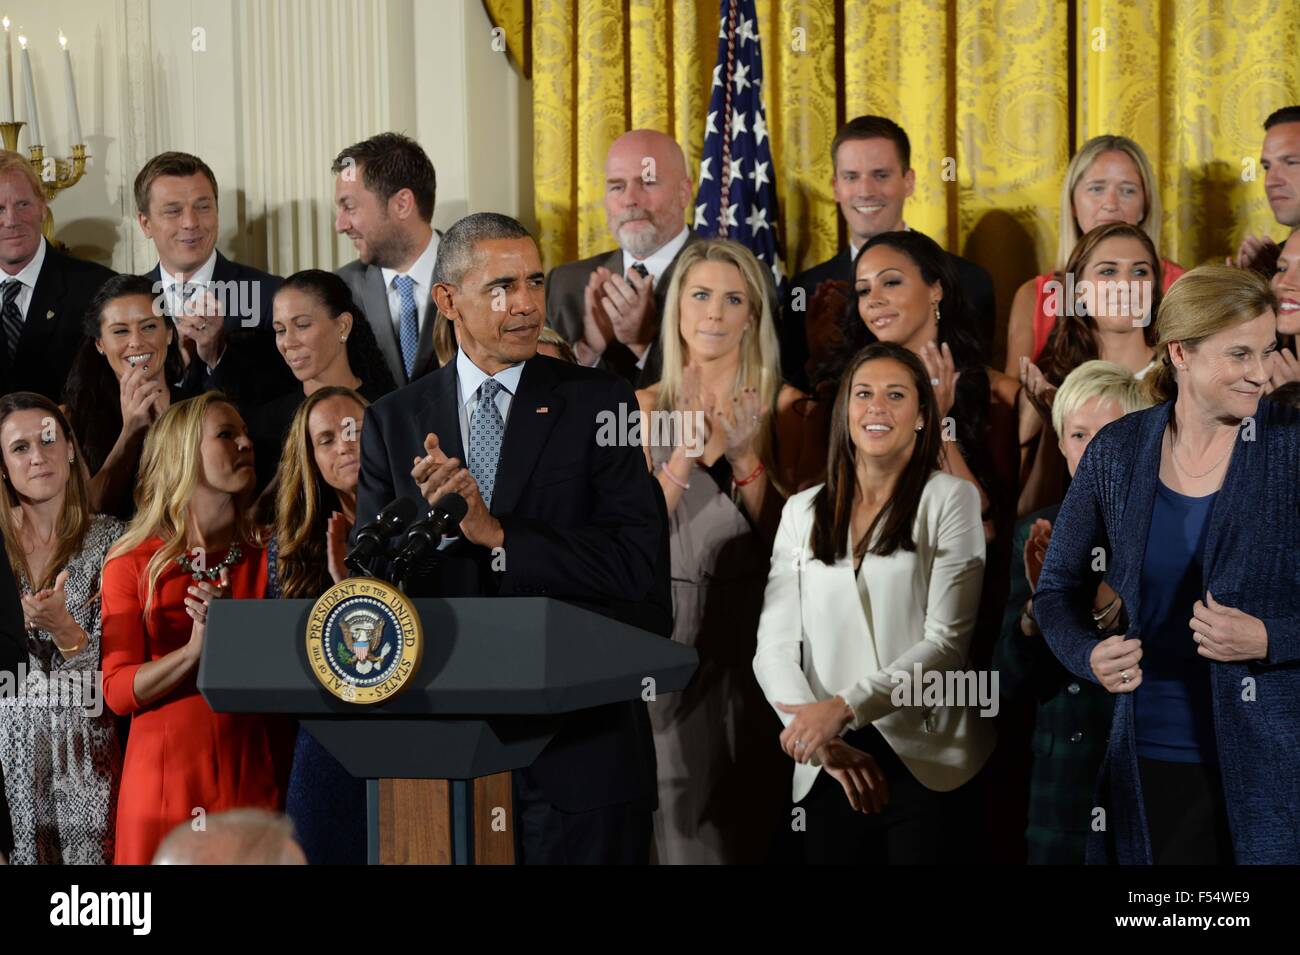 Washington, District of Columbia, USA. 27th Oct, 2015. 10/24/15- The White House- Washington DC.President Barack Obama welcomes the United States Women's National Soccer Team to the White House to honor the team and their victory in the 2015 FIFA Women's World Cup. photos by: - ImageCatcher News Credit:  Christy Bowe/Globe Photos/ZUMA Wire/Alamy Live News Stock Photo